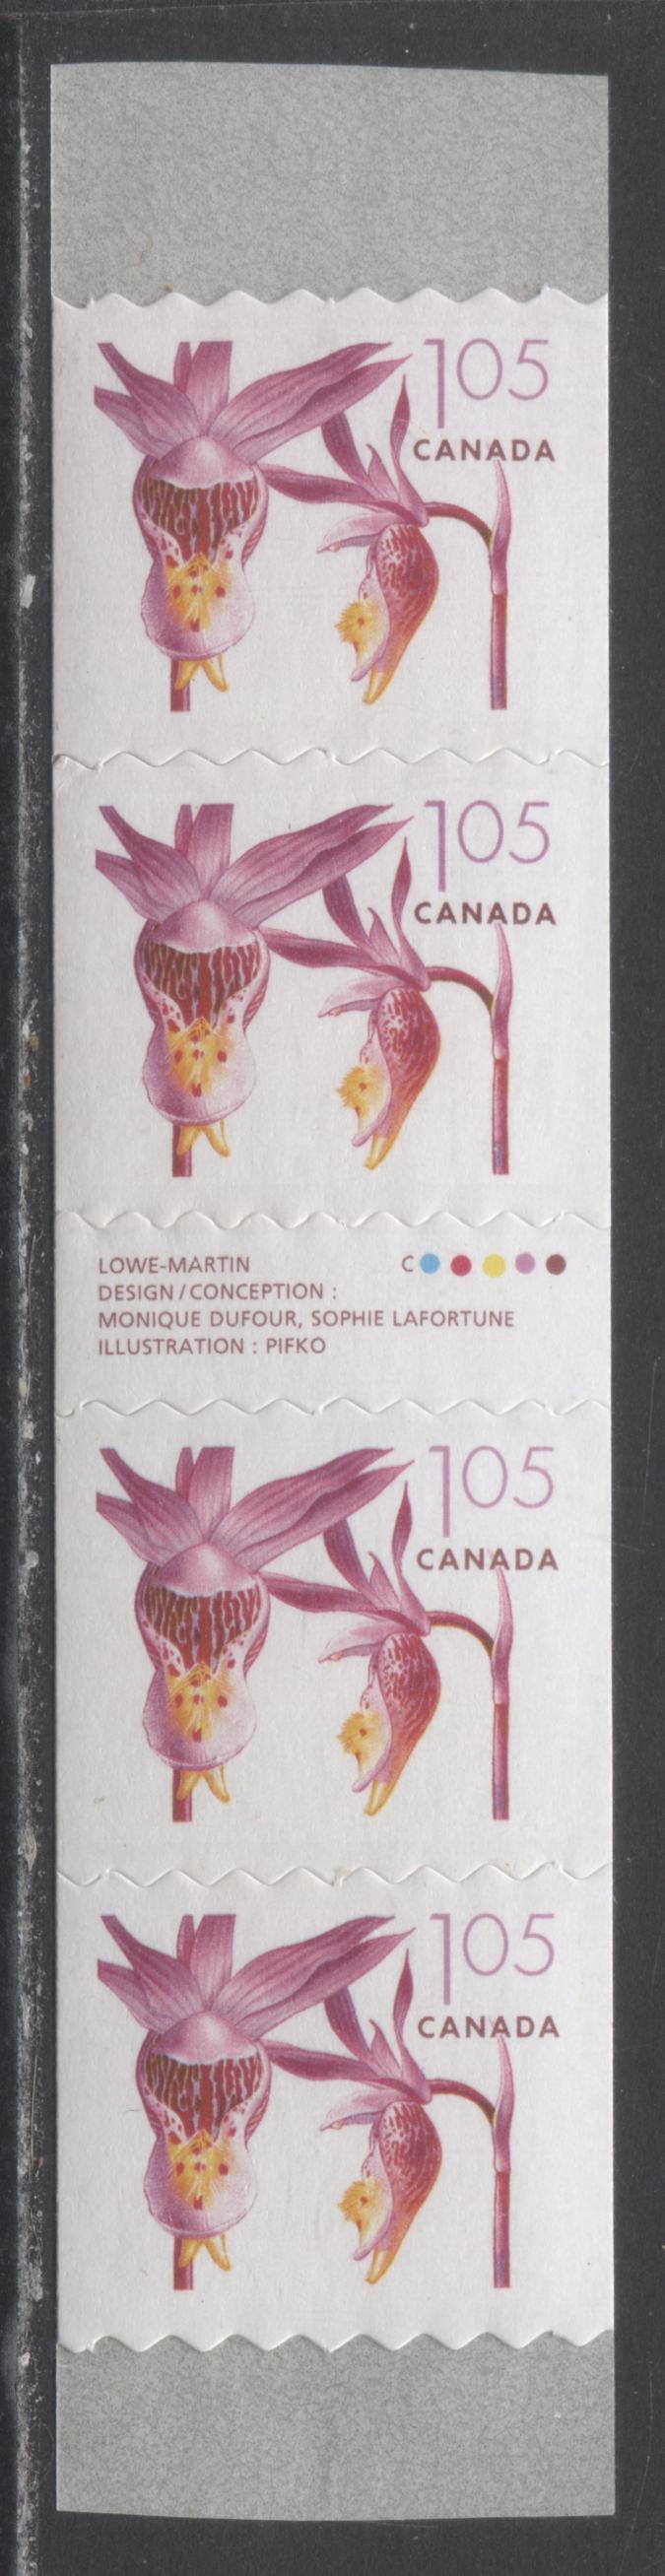 Lot 47 Canada #2130i $1.05 Multicolored Pink Fairy Slipper, 2005-2006 Flower Definitives (2) - Coils, A VFNH Gutter Strip Of 4 On DF TRC Paper With Weak Tagging And High Inscription $10.5